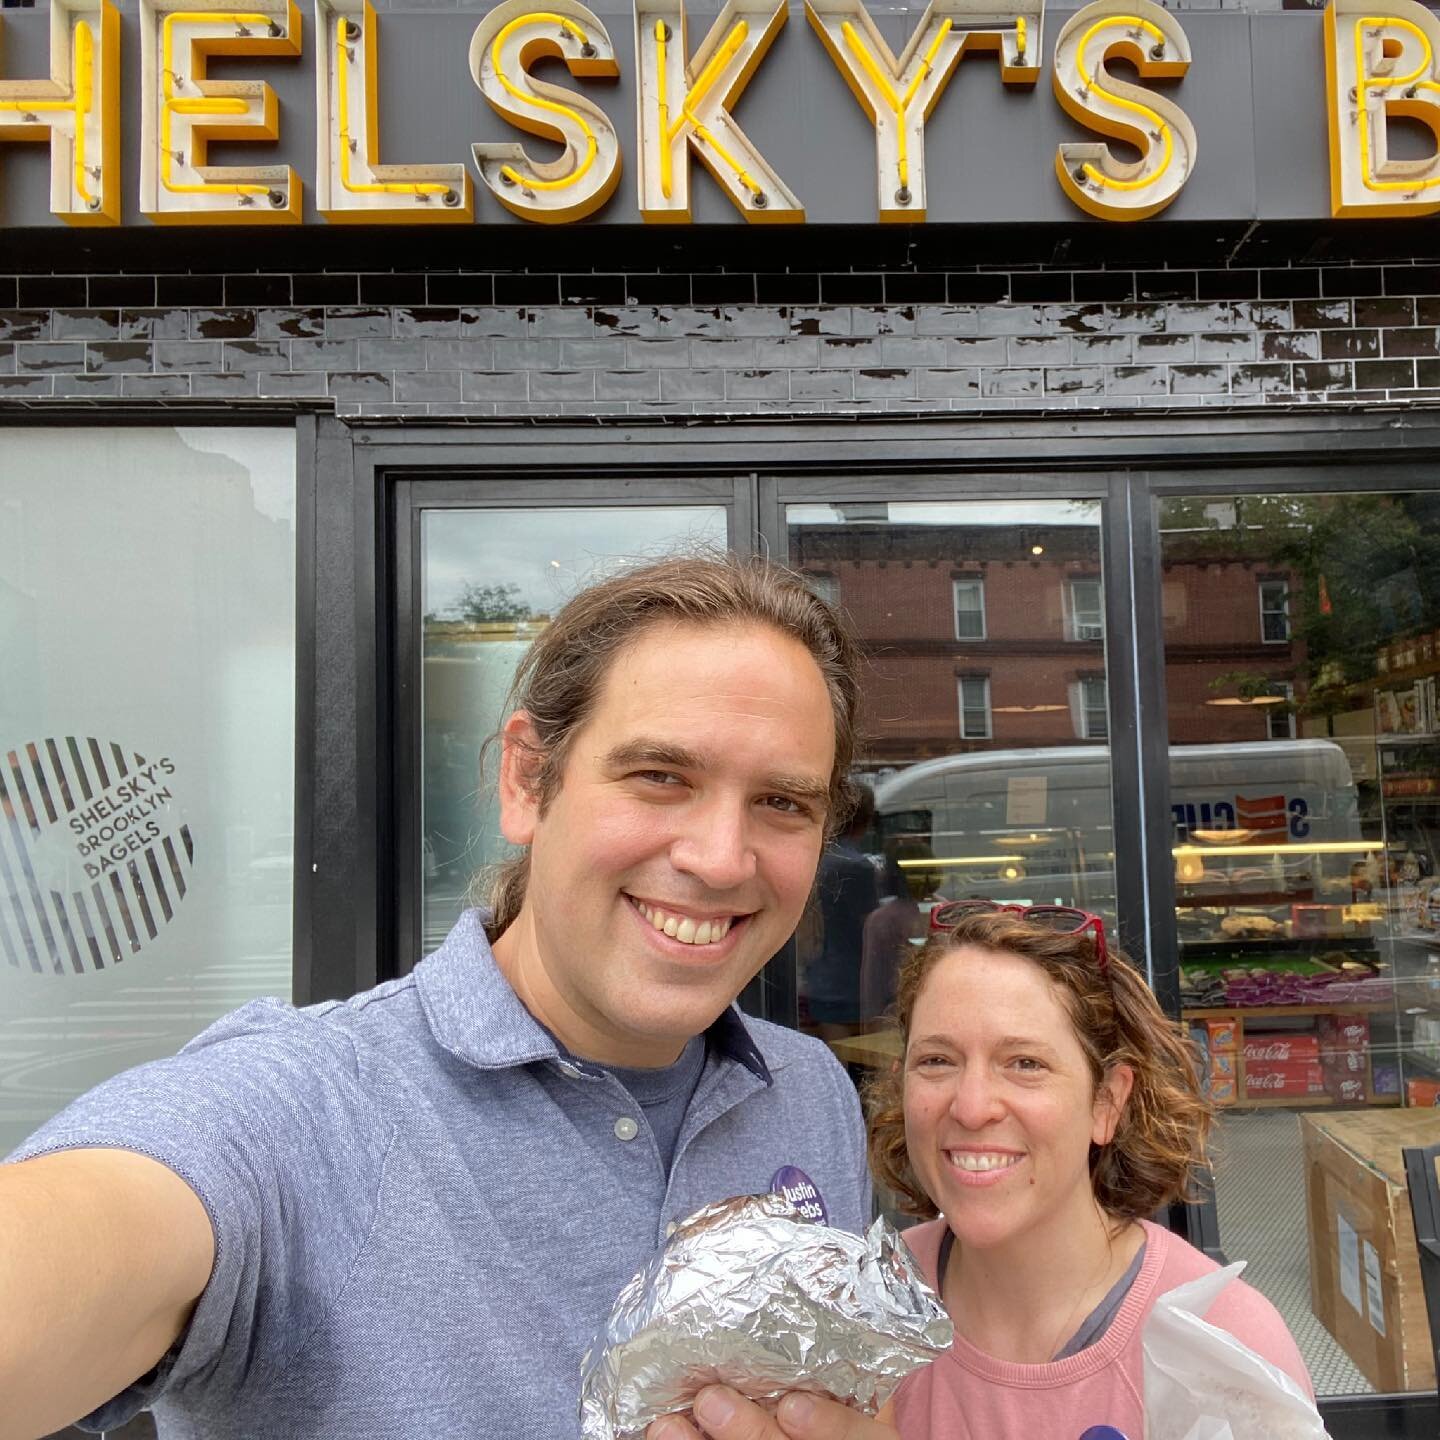 Casey and I took a break from a long day of knocking doors today to get lunch at one of our favorite places to eat in Brooklyn: Shelsky's! Ben behind the counter recommended we try the pastrami, egg, and cheese on a pumpernickel, and we&rsquo;re so g